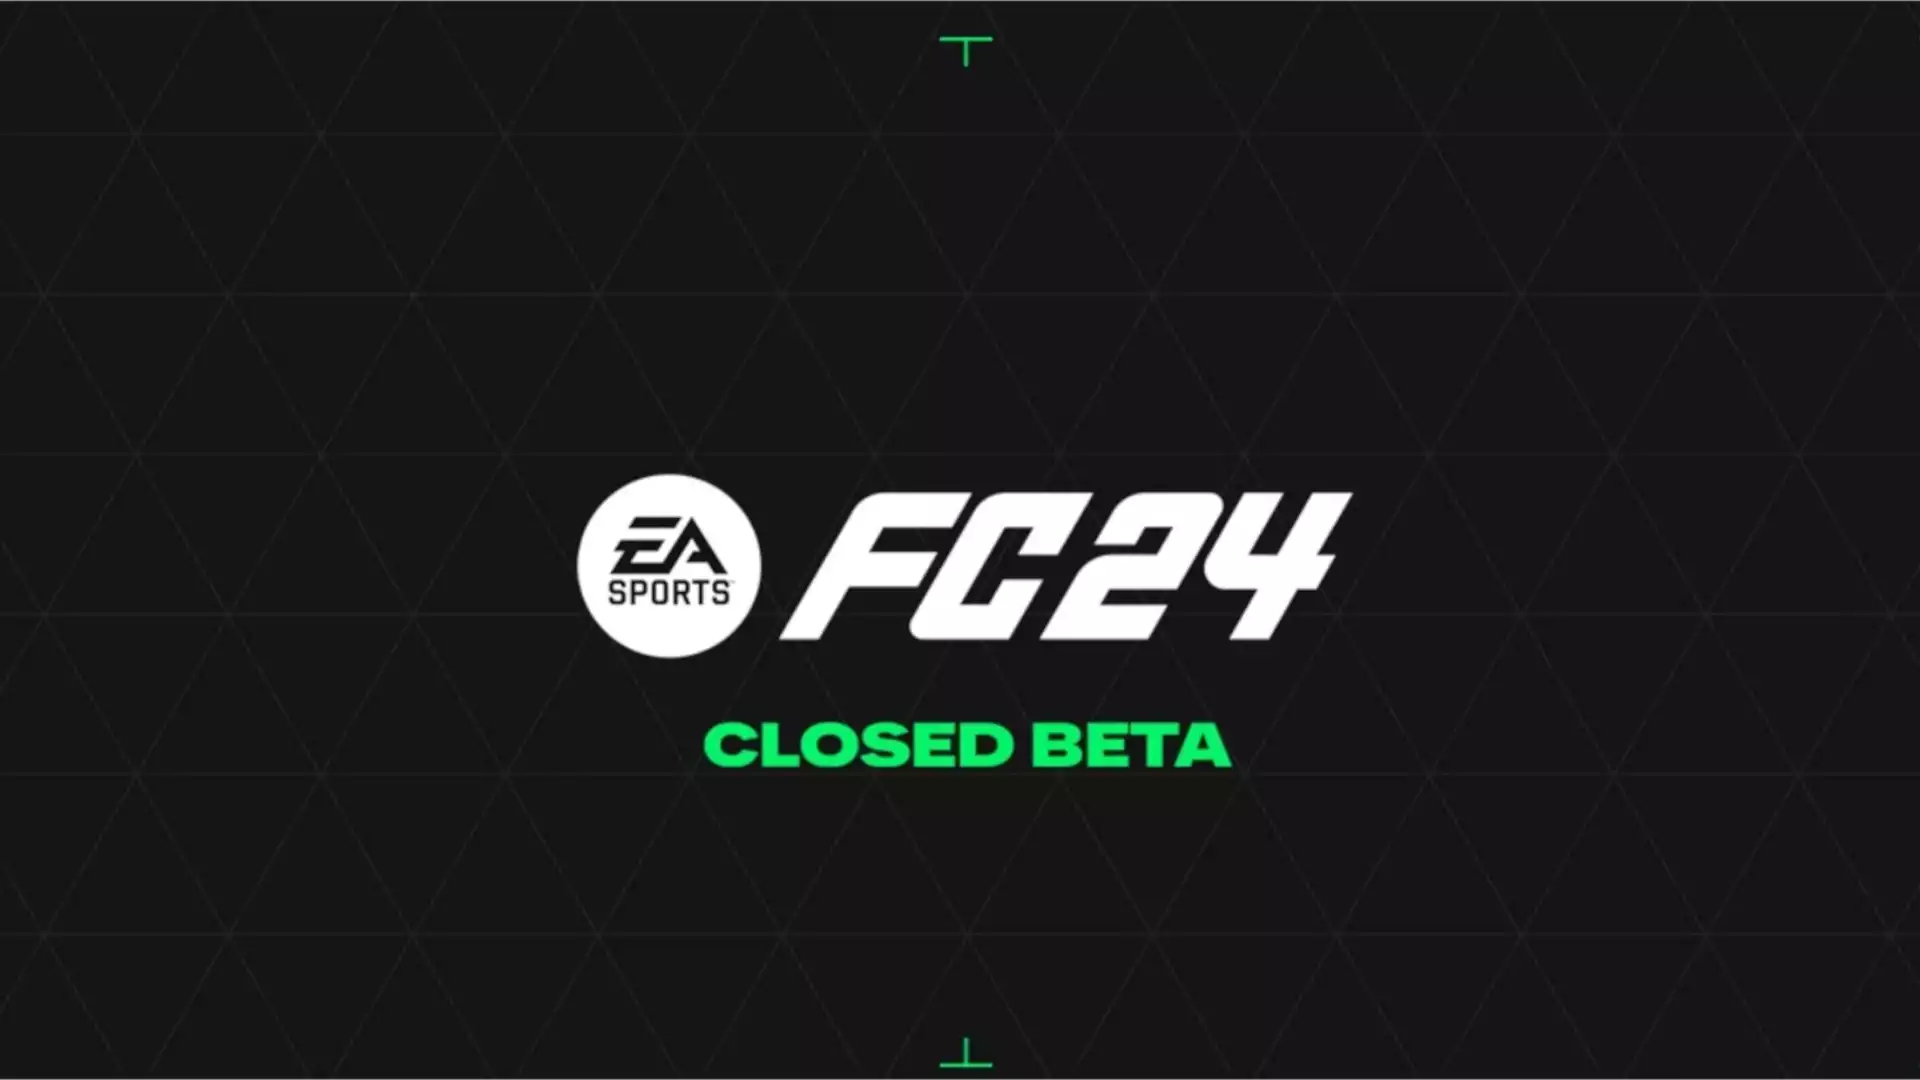 FC 24 beta: Start date, time & how to enter